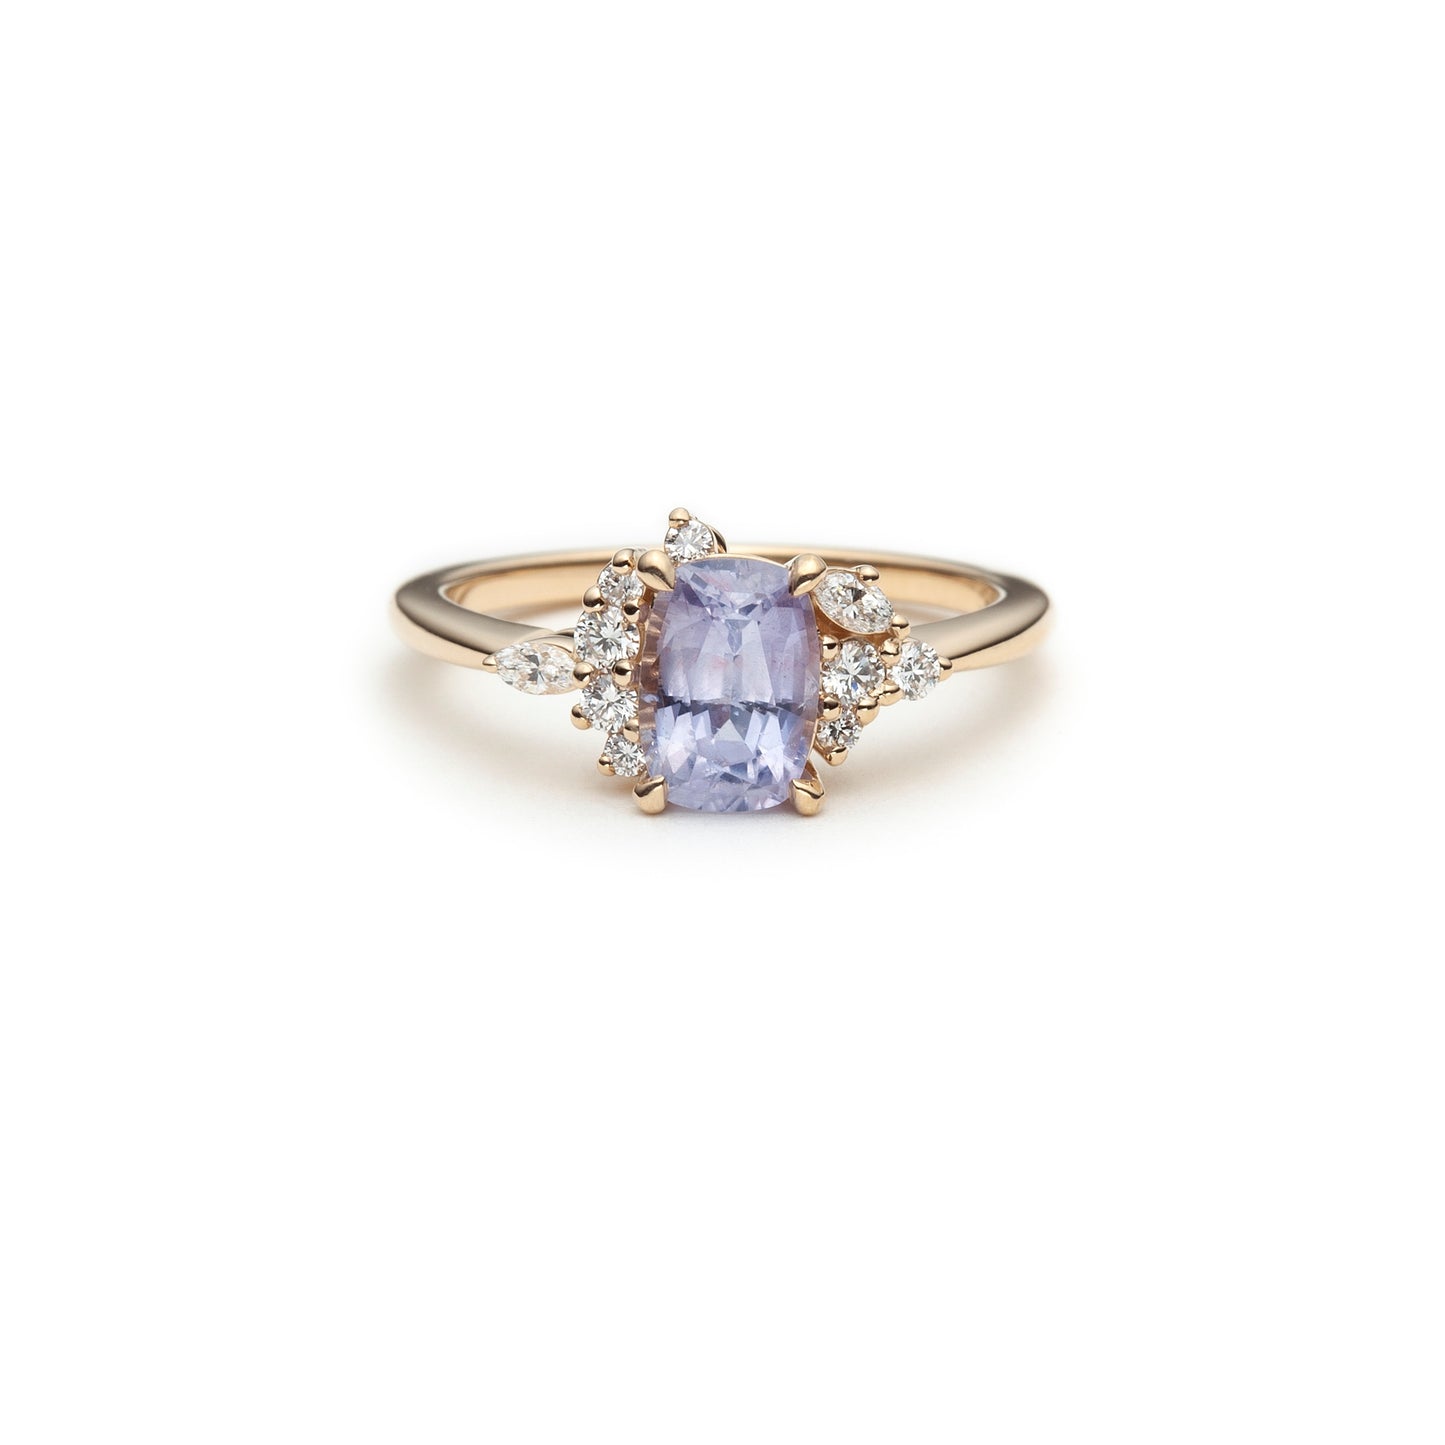 One of a kind lilac sapphire and diamond asymmetric ring